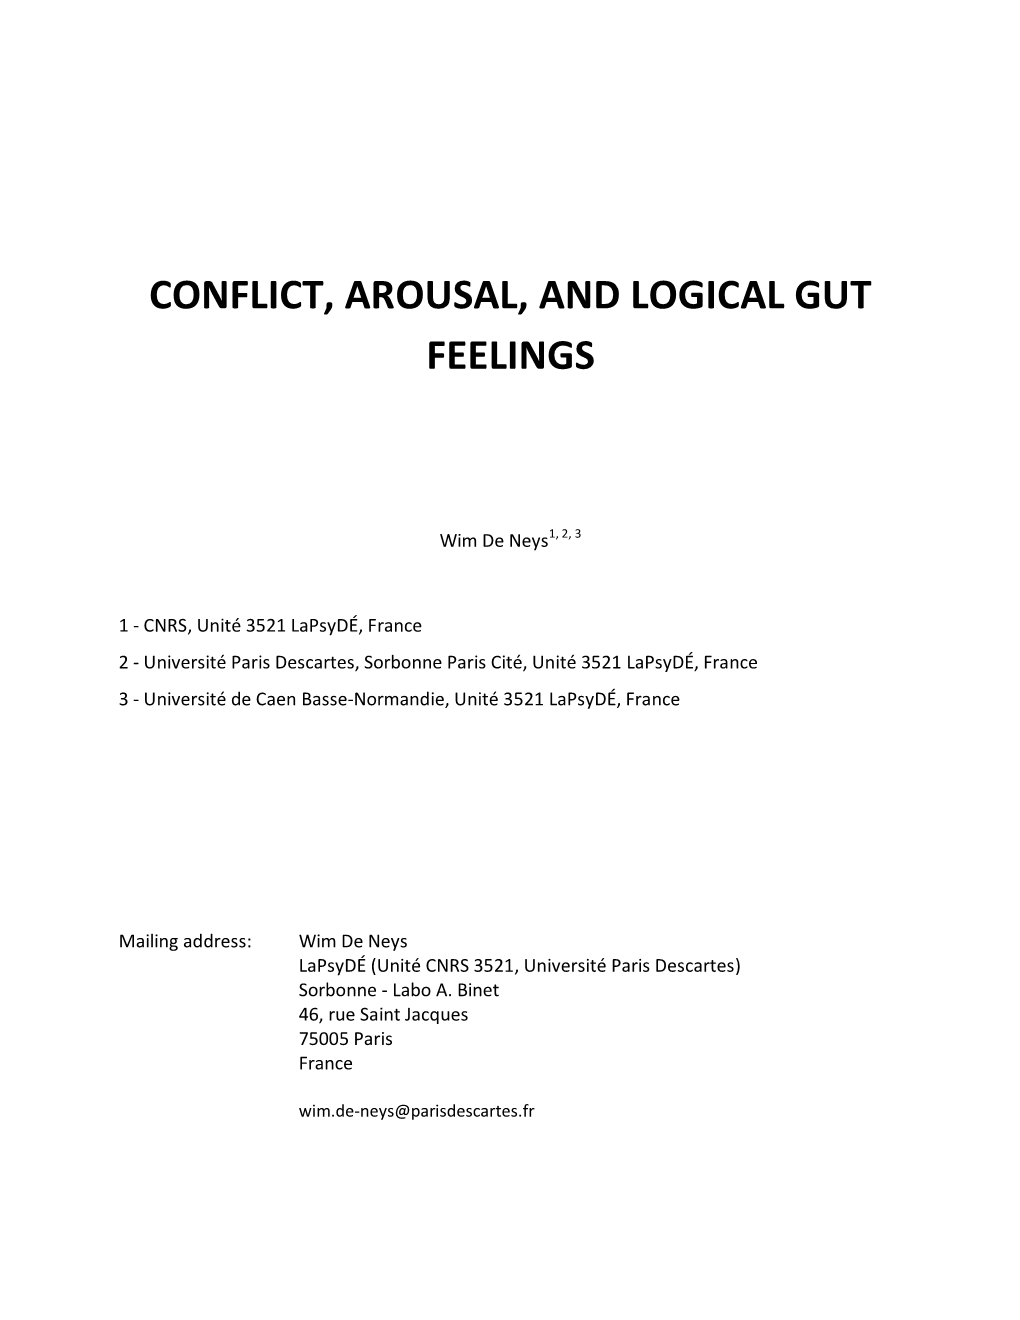 Conflict, Arousal, and Logical Gut Feelings